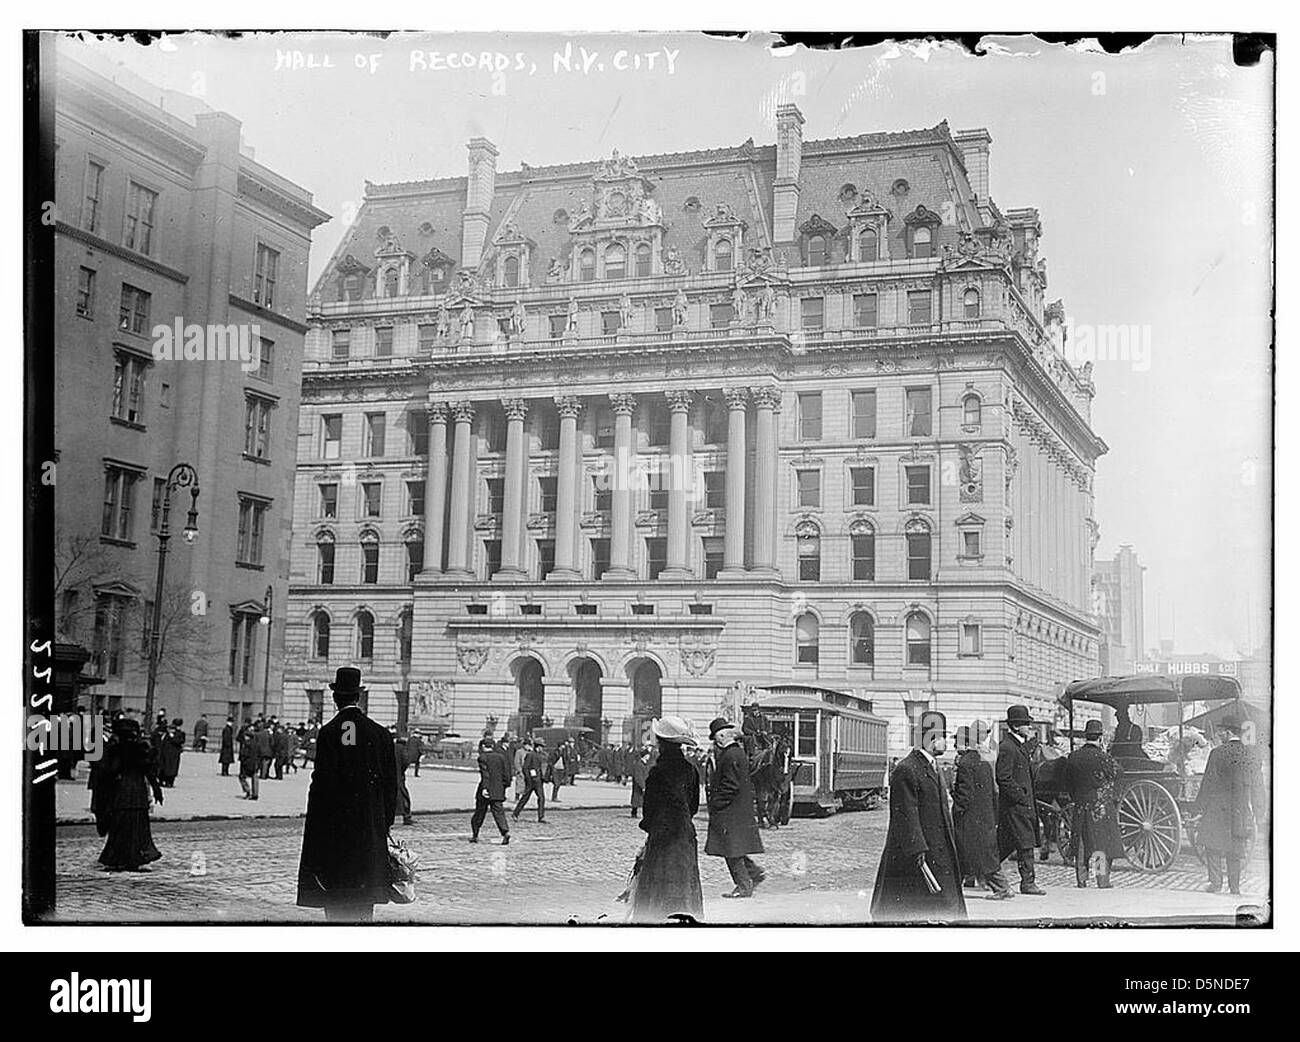 Hall of Records, N.Y.C. (LOC) Stock Photo